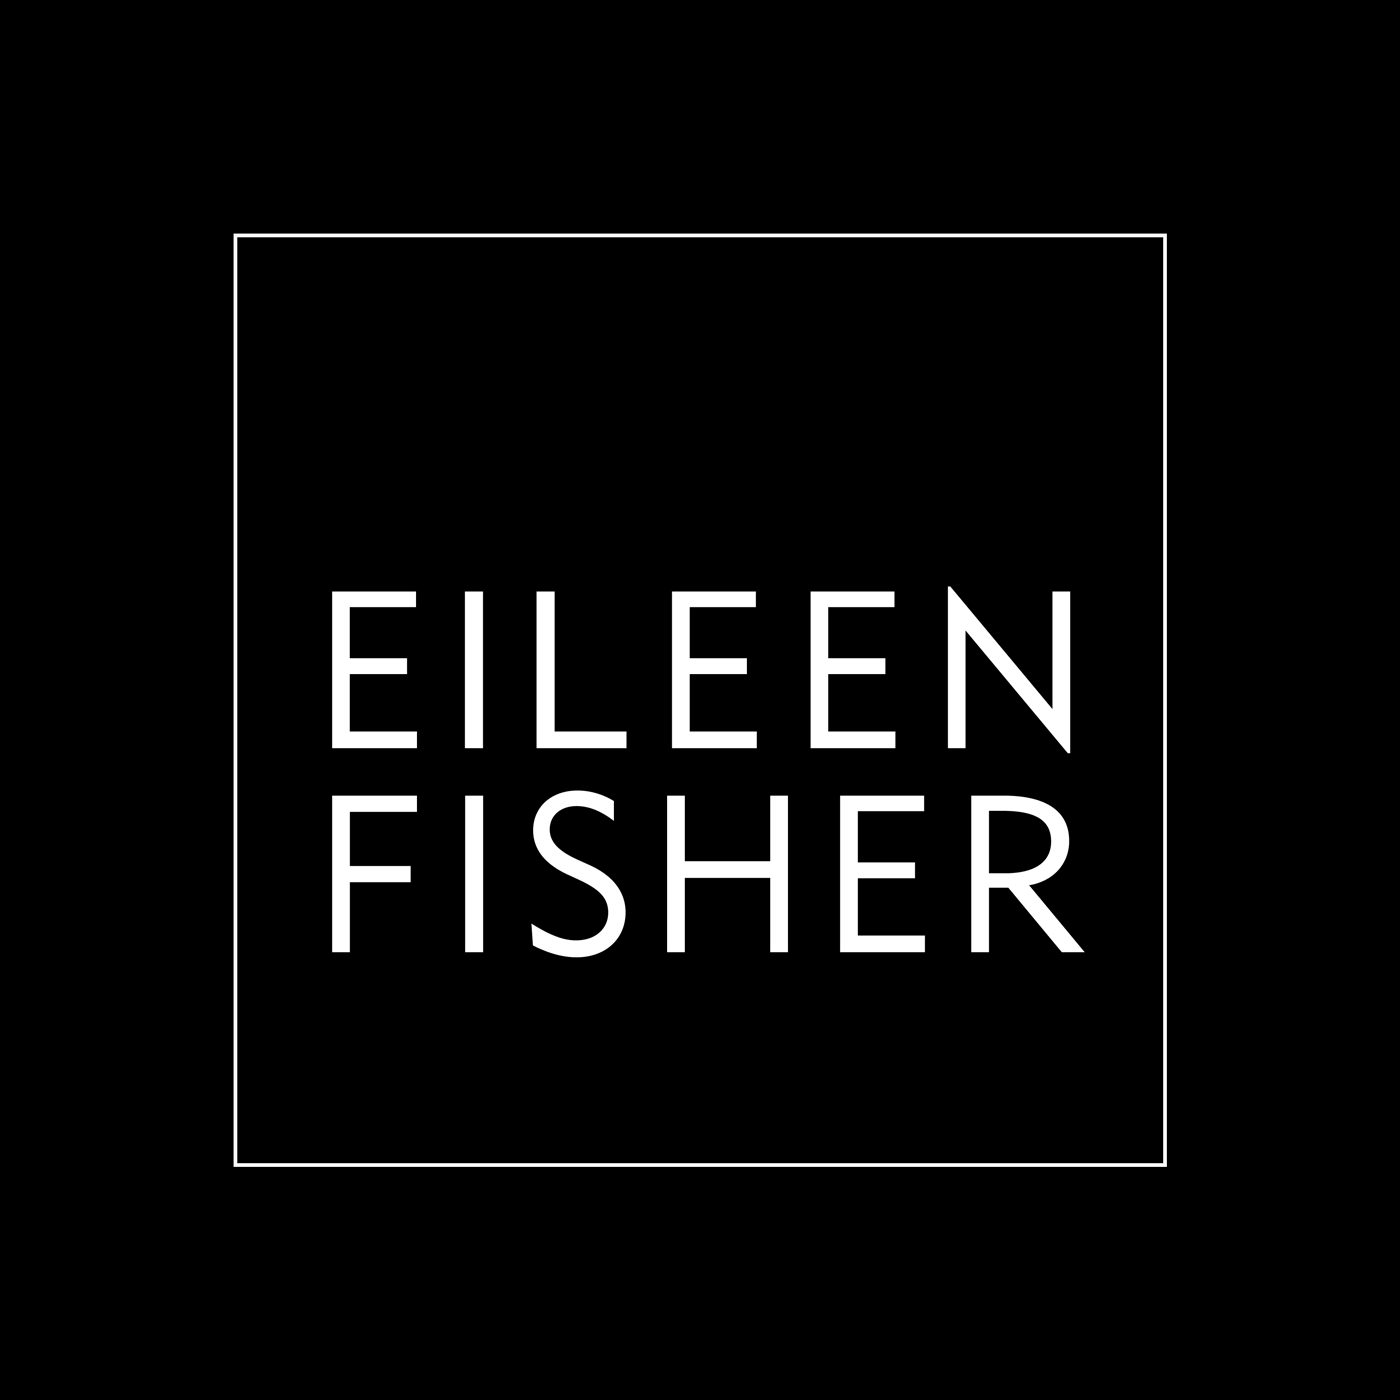 Fisher Logo - Eileen Fisher logo - Fonts In Use